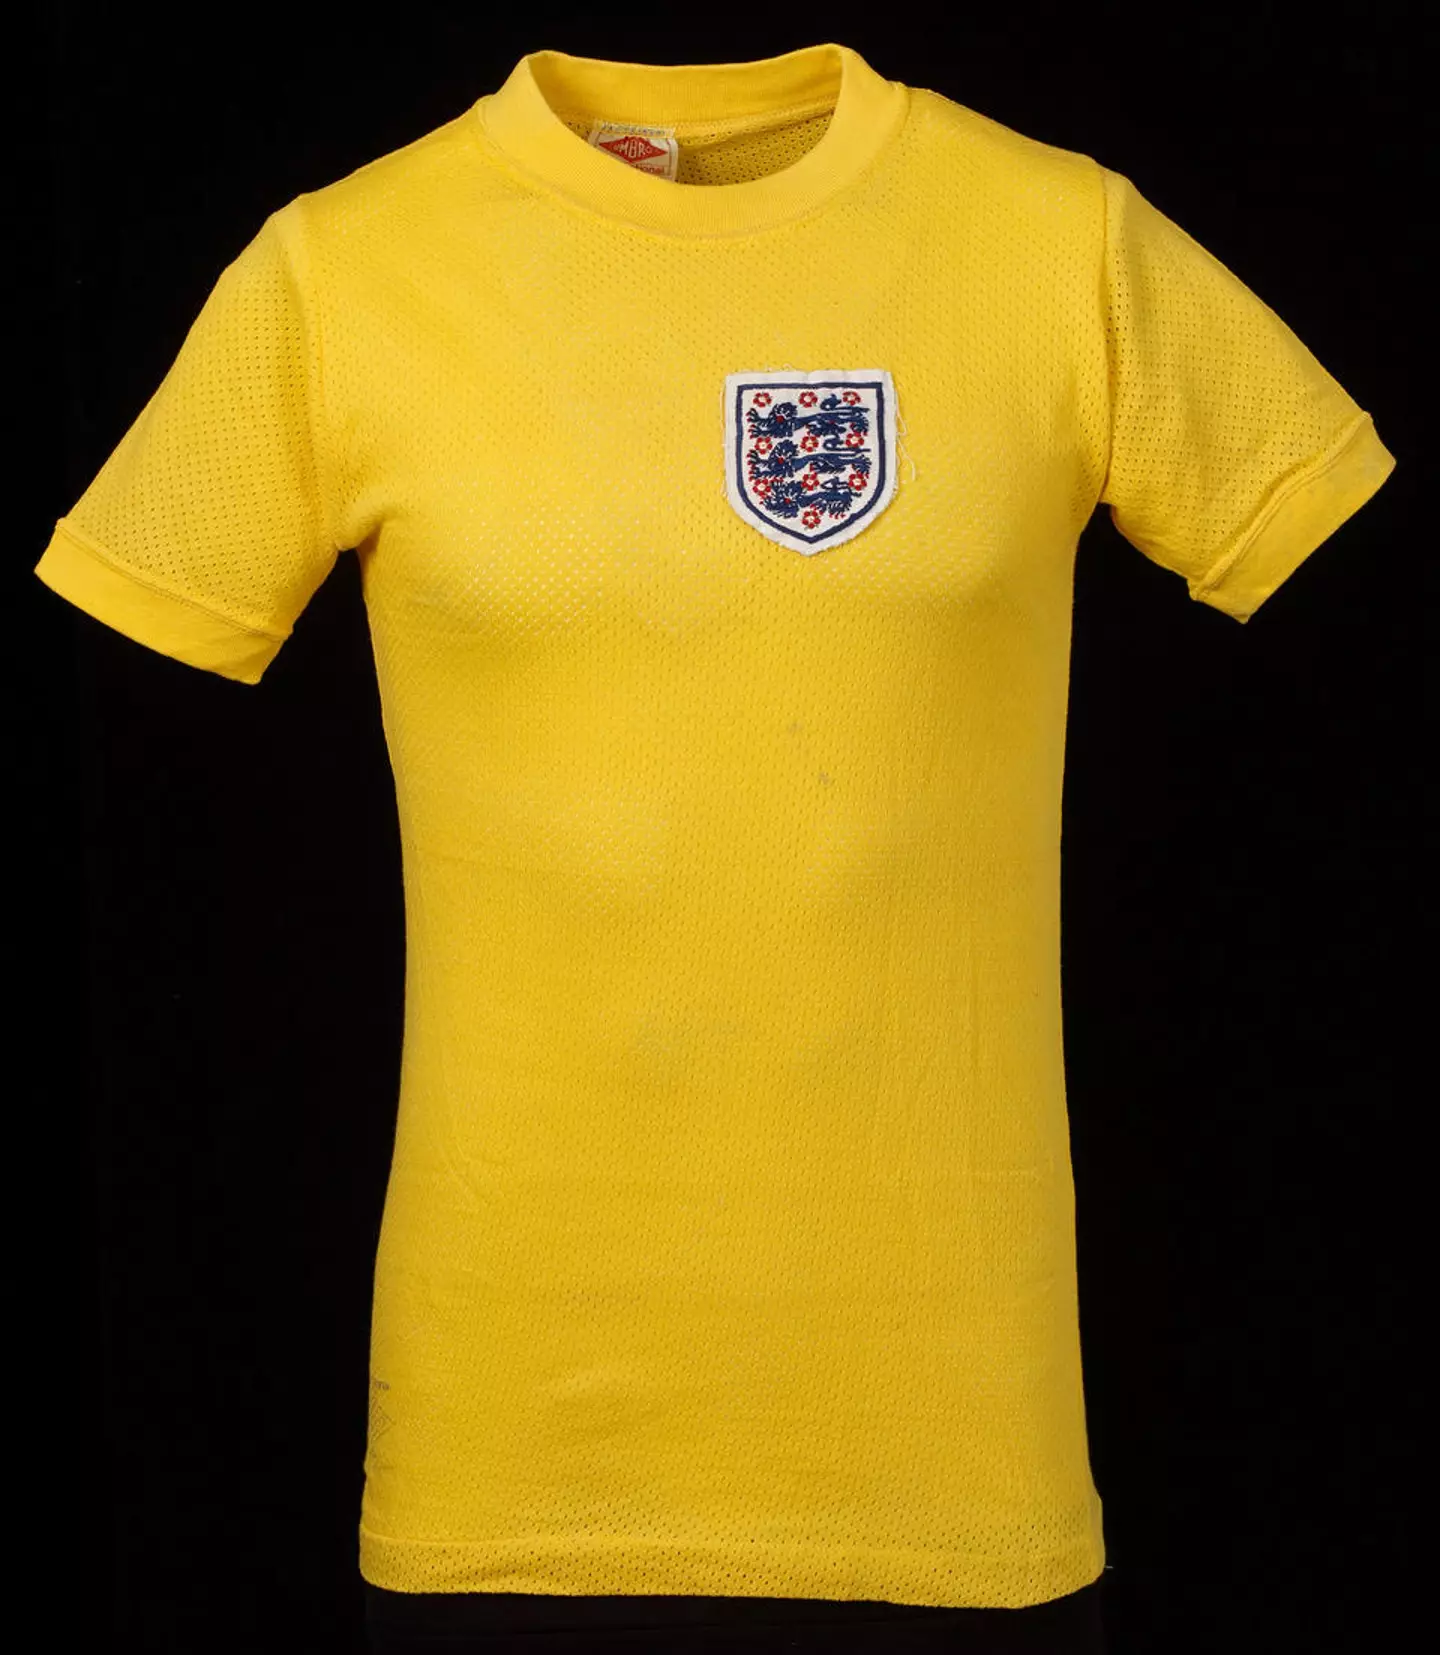 England's ill-fated yellow kit.